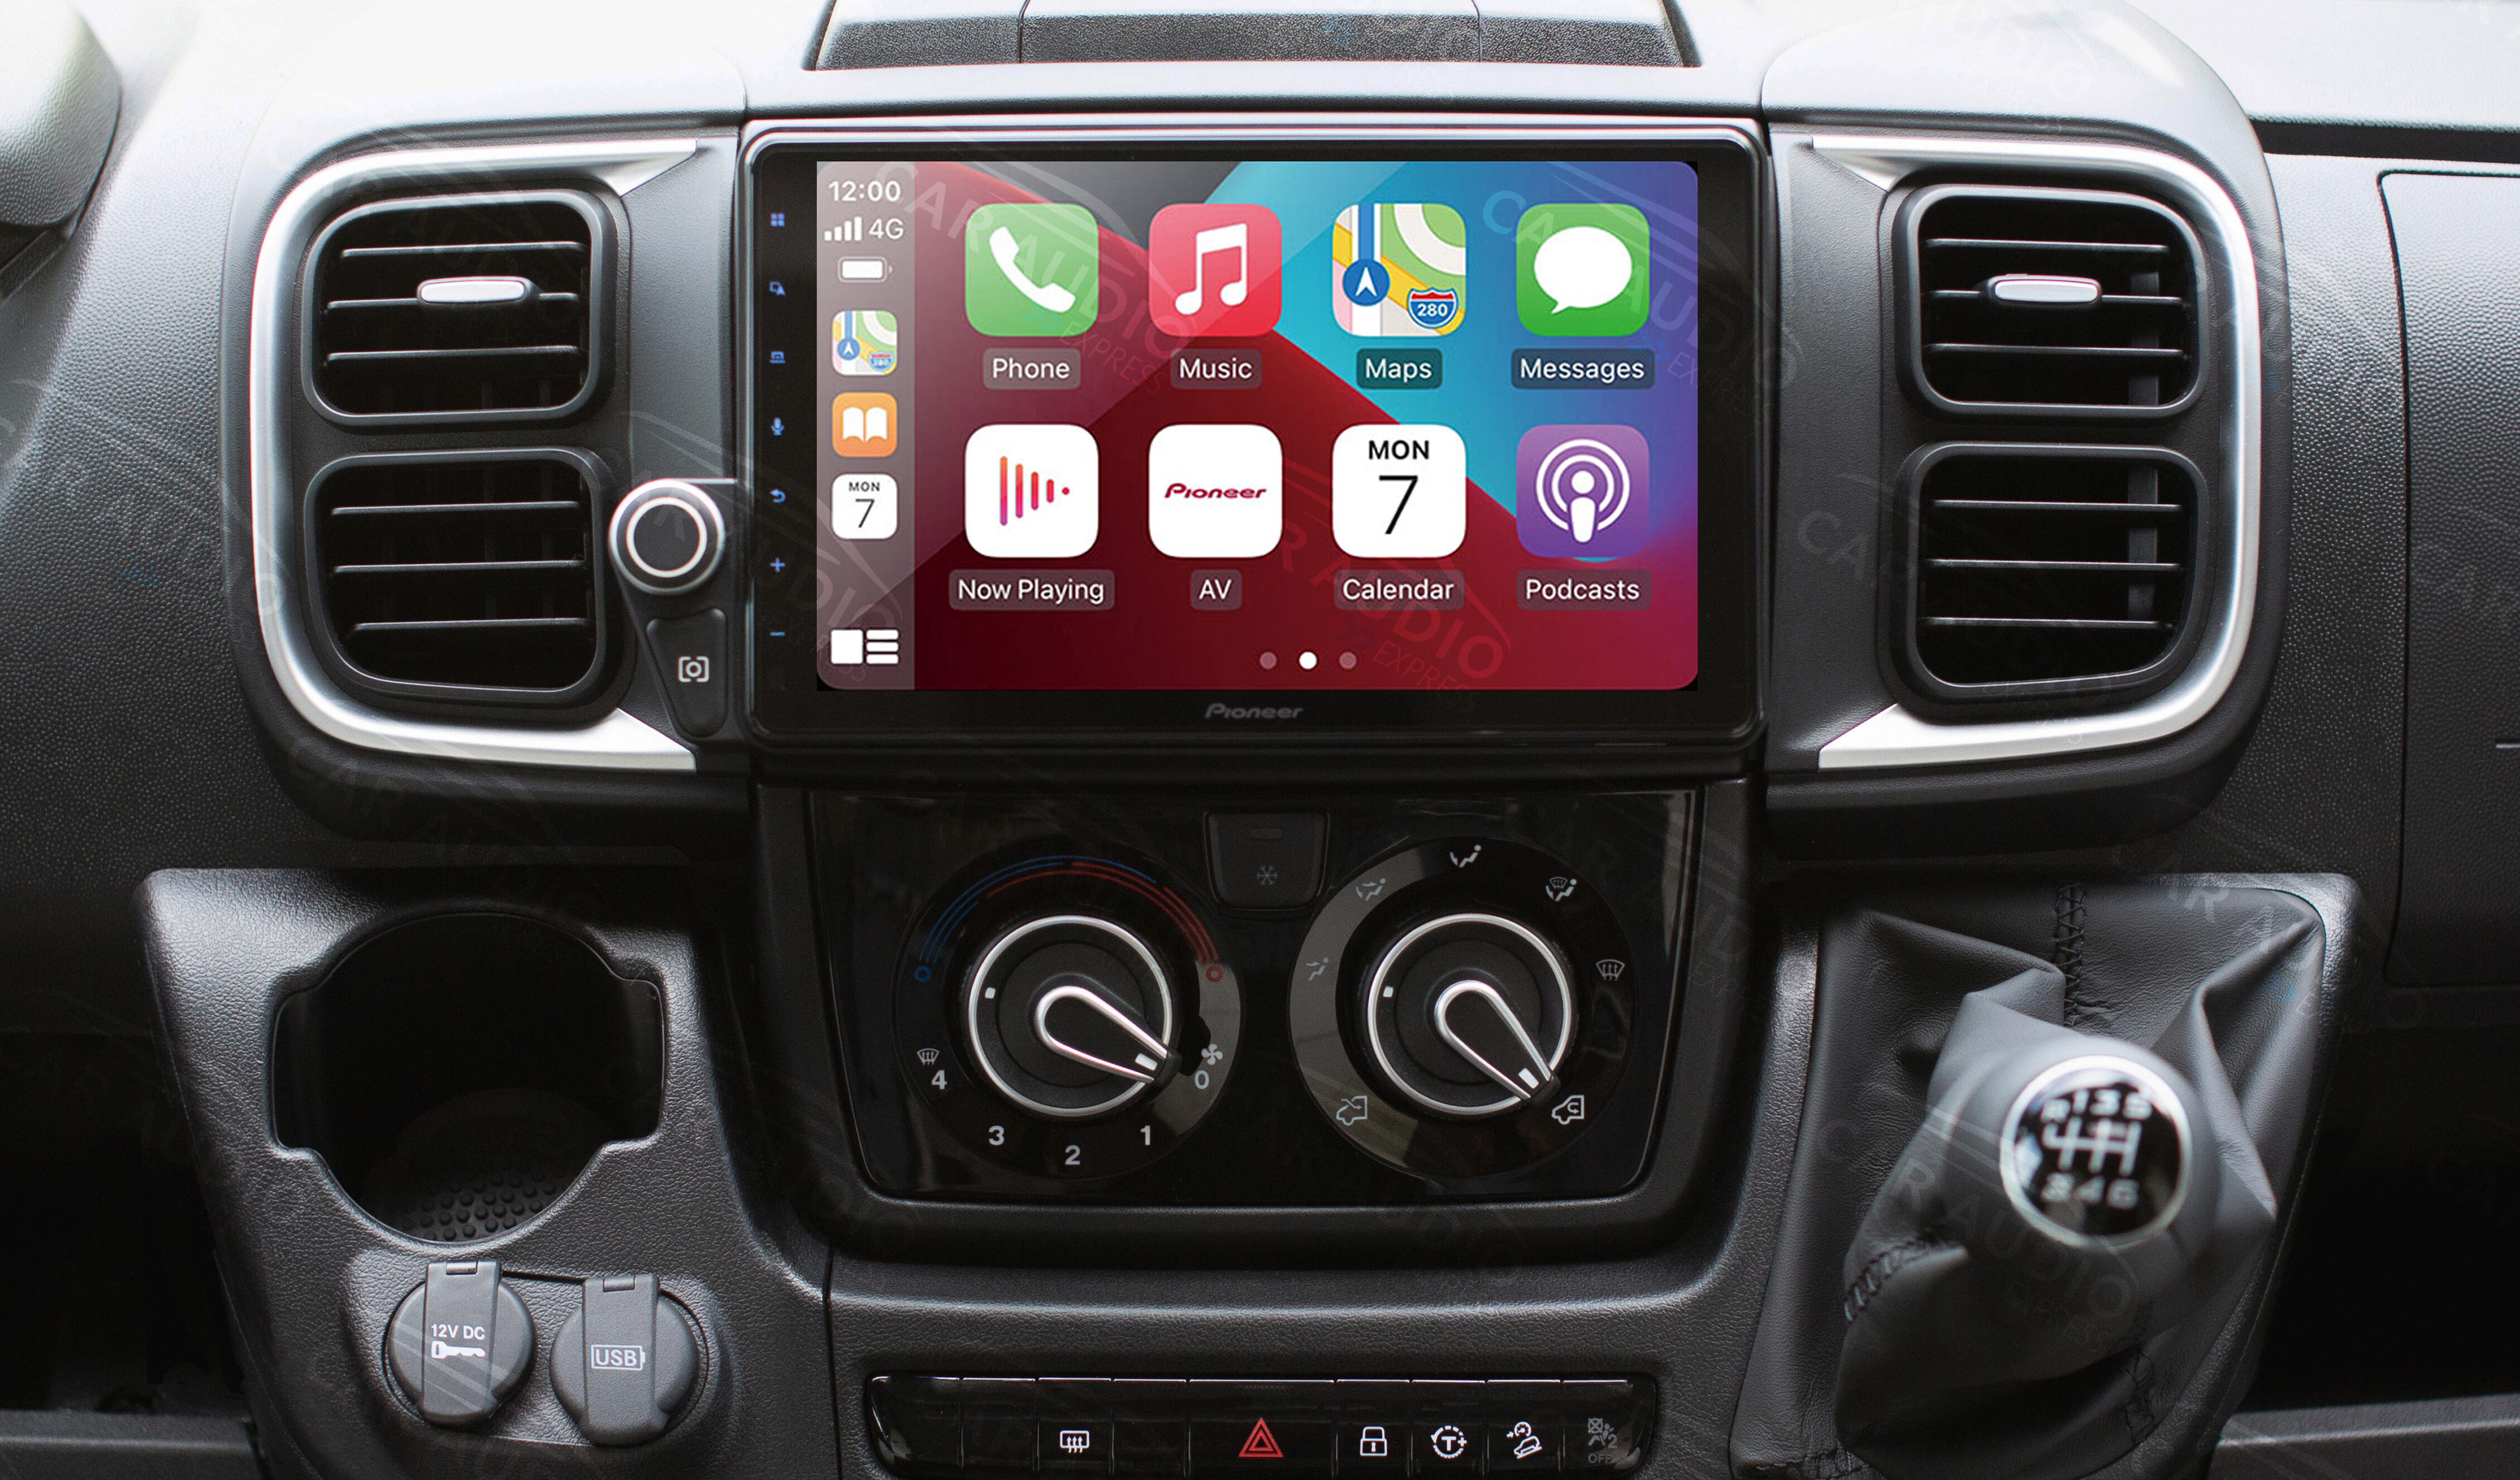 Fiat Ducato with new radio installation including Apple CarPlay and Android Auto